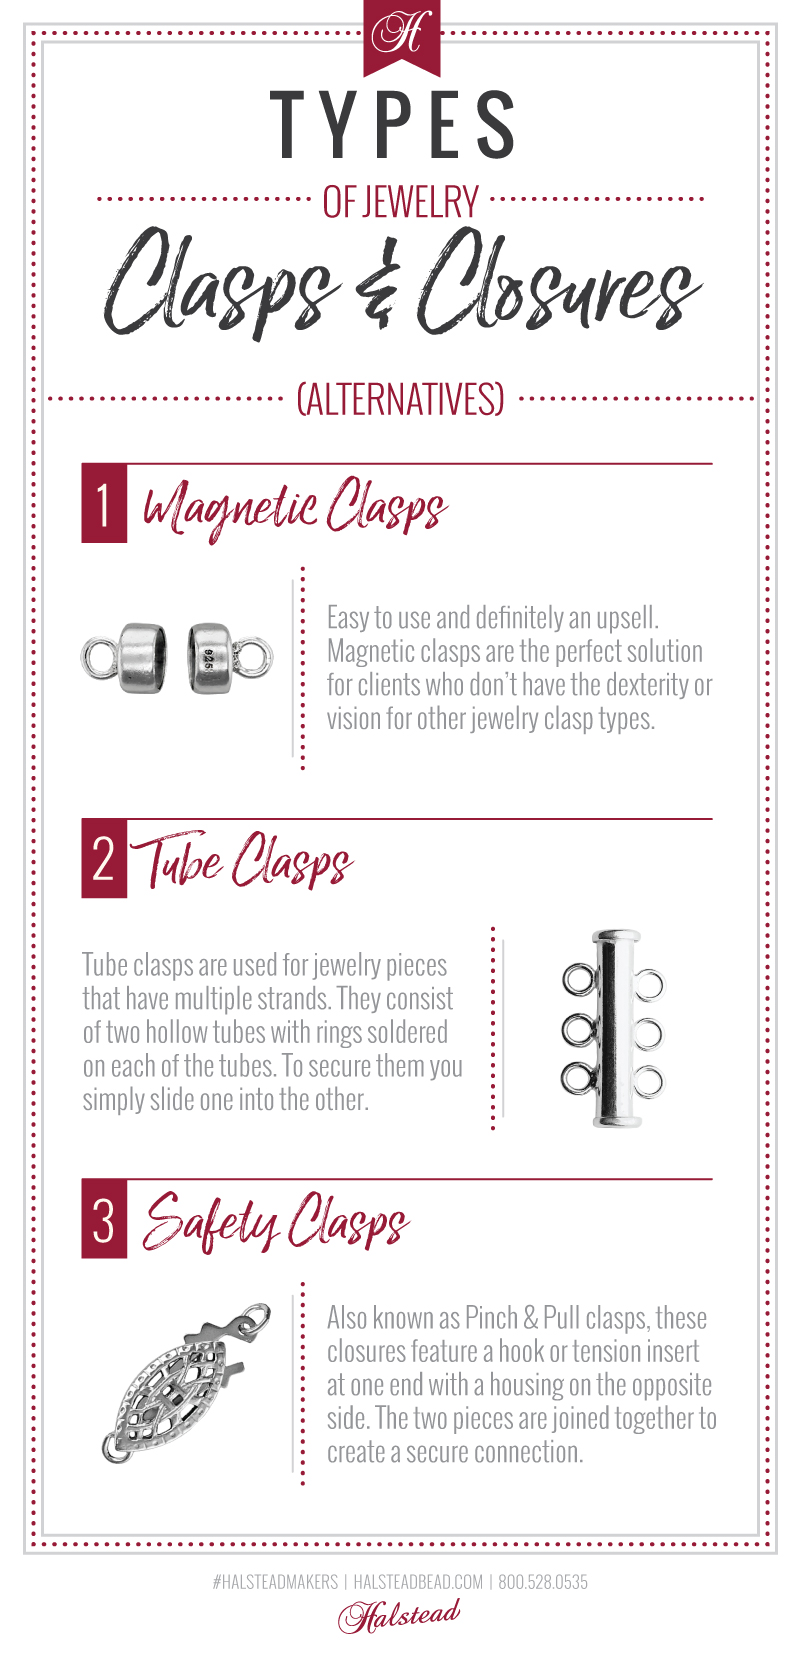 Types of Clasps & Closures Infographic: Magnetic Clasps, Tube Clasps, Safety Clasps